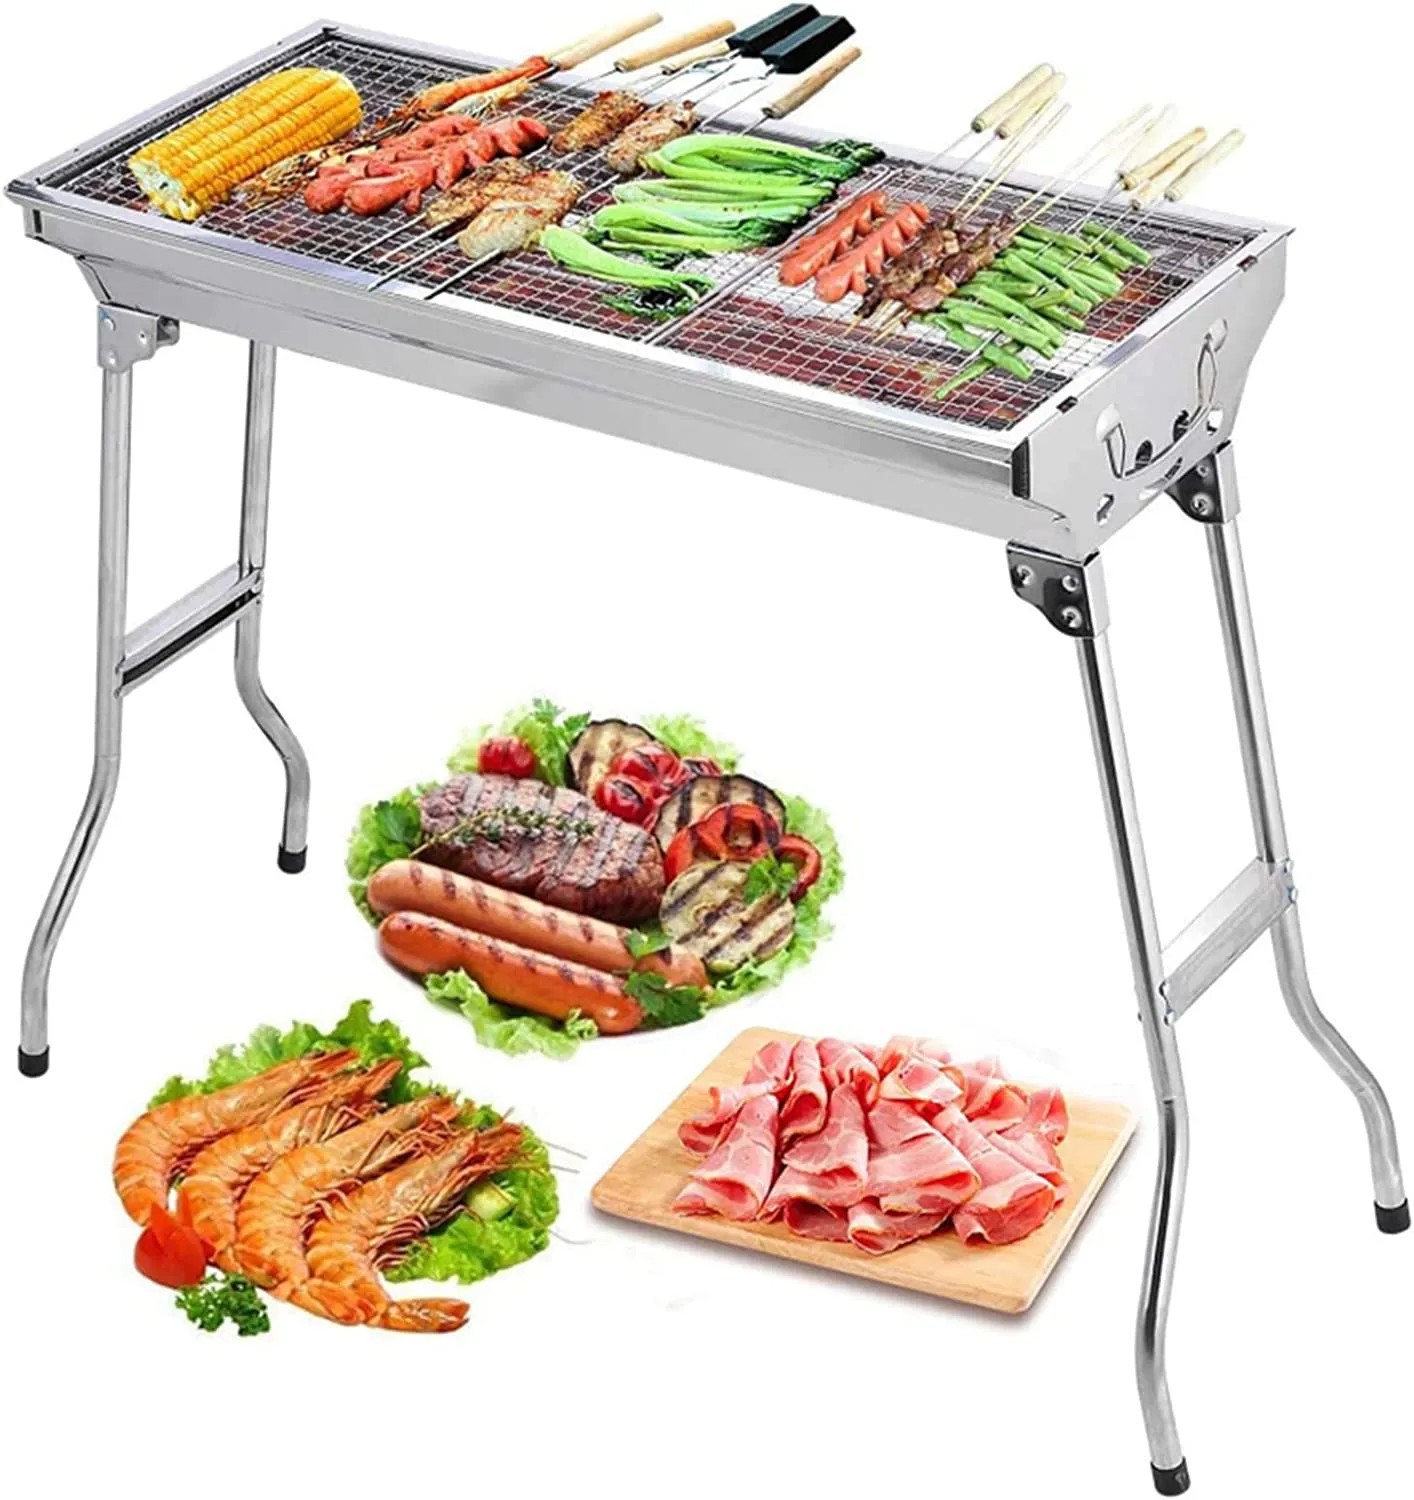 Uten Barbecue Charcoal Grill